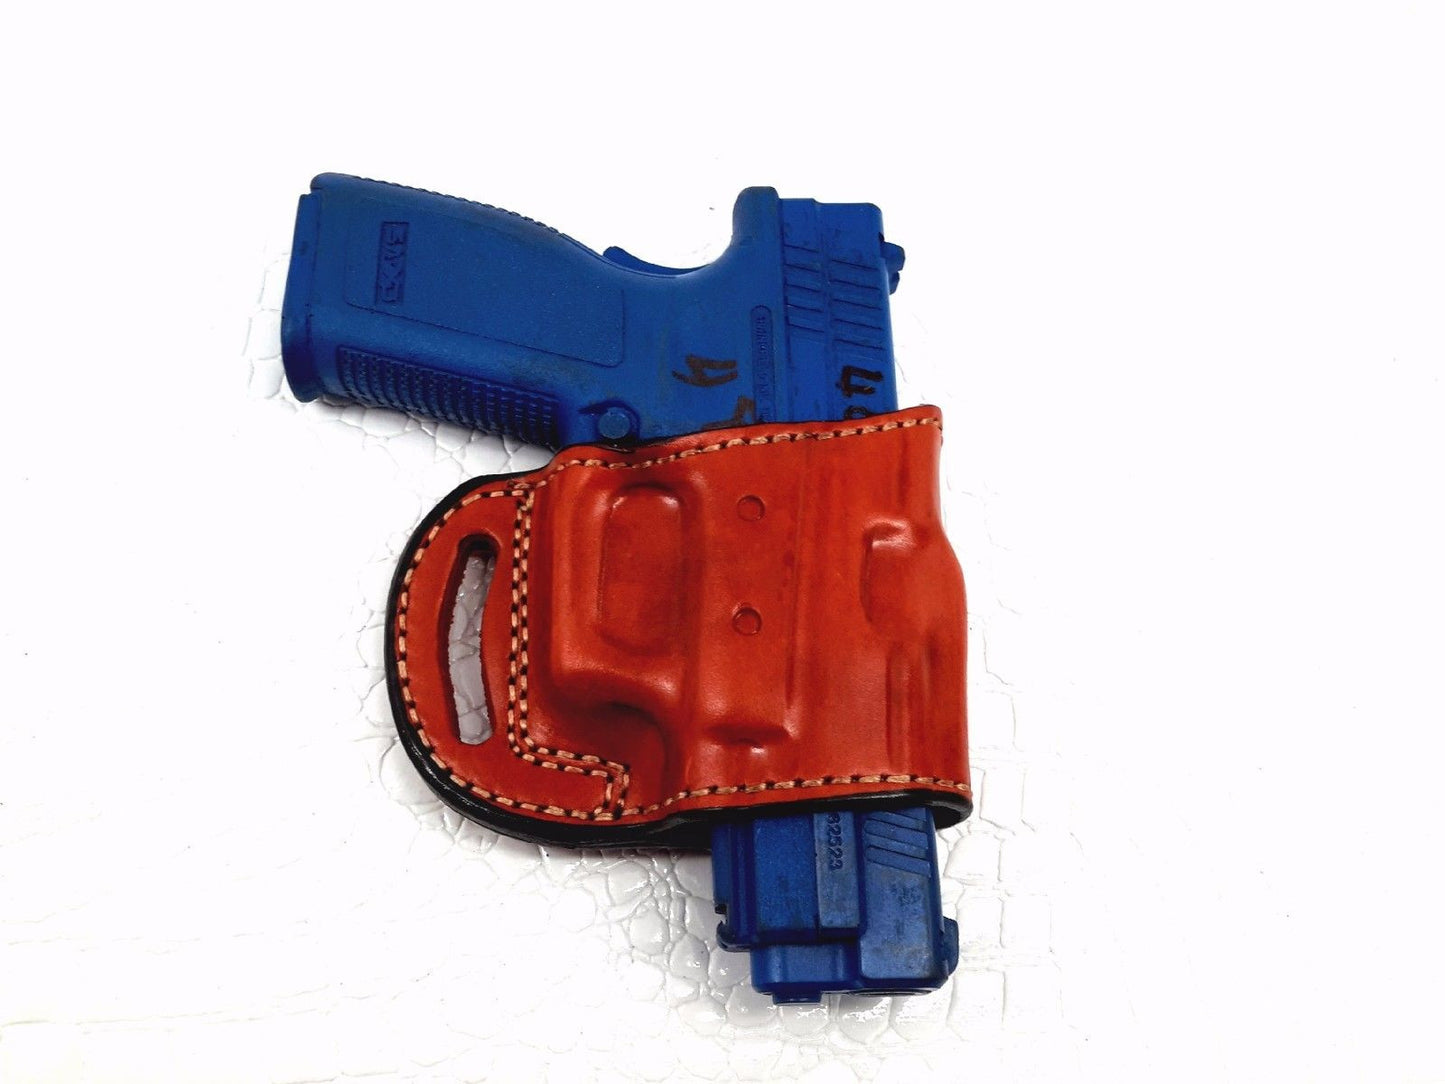 Yaqui slide belt holster for Springfield Armory XD-40 4", MyHolster